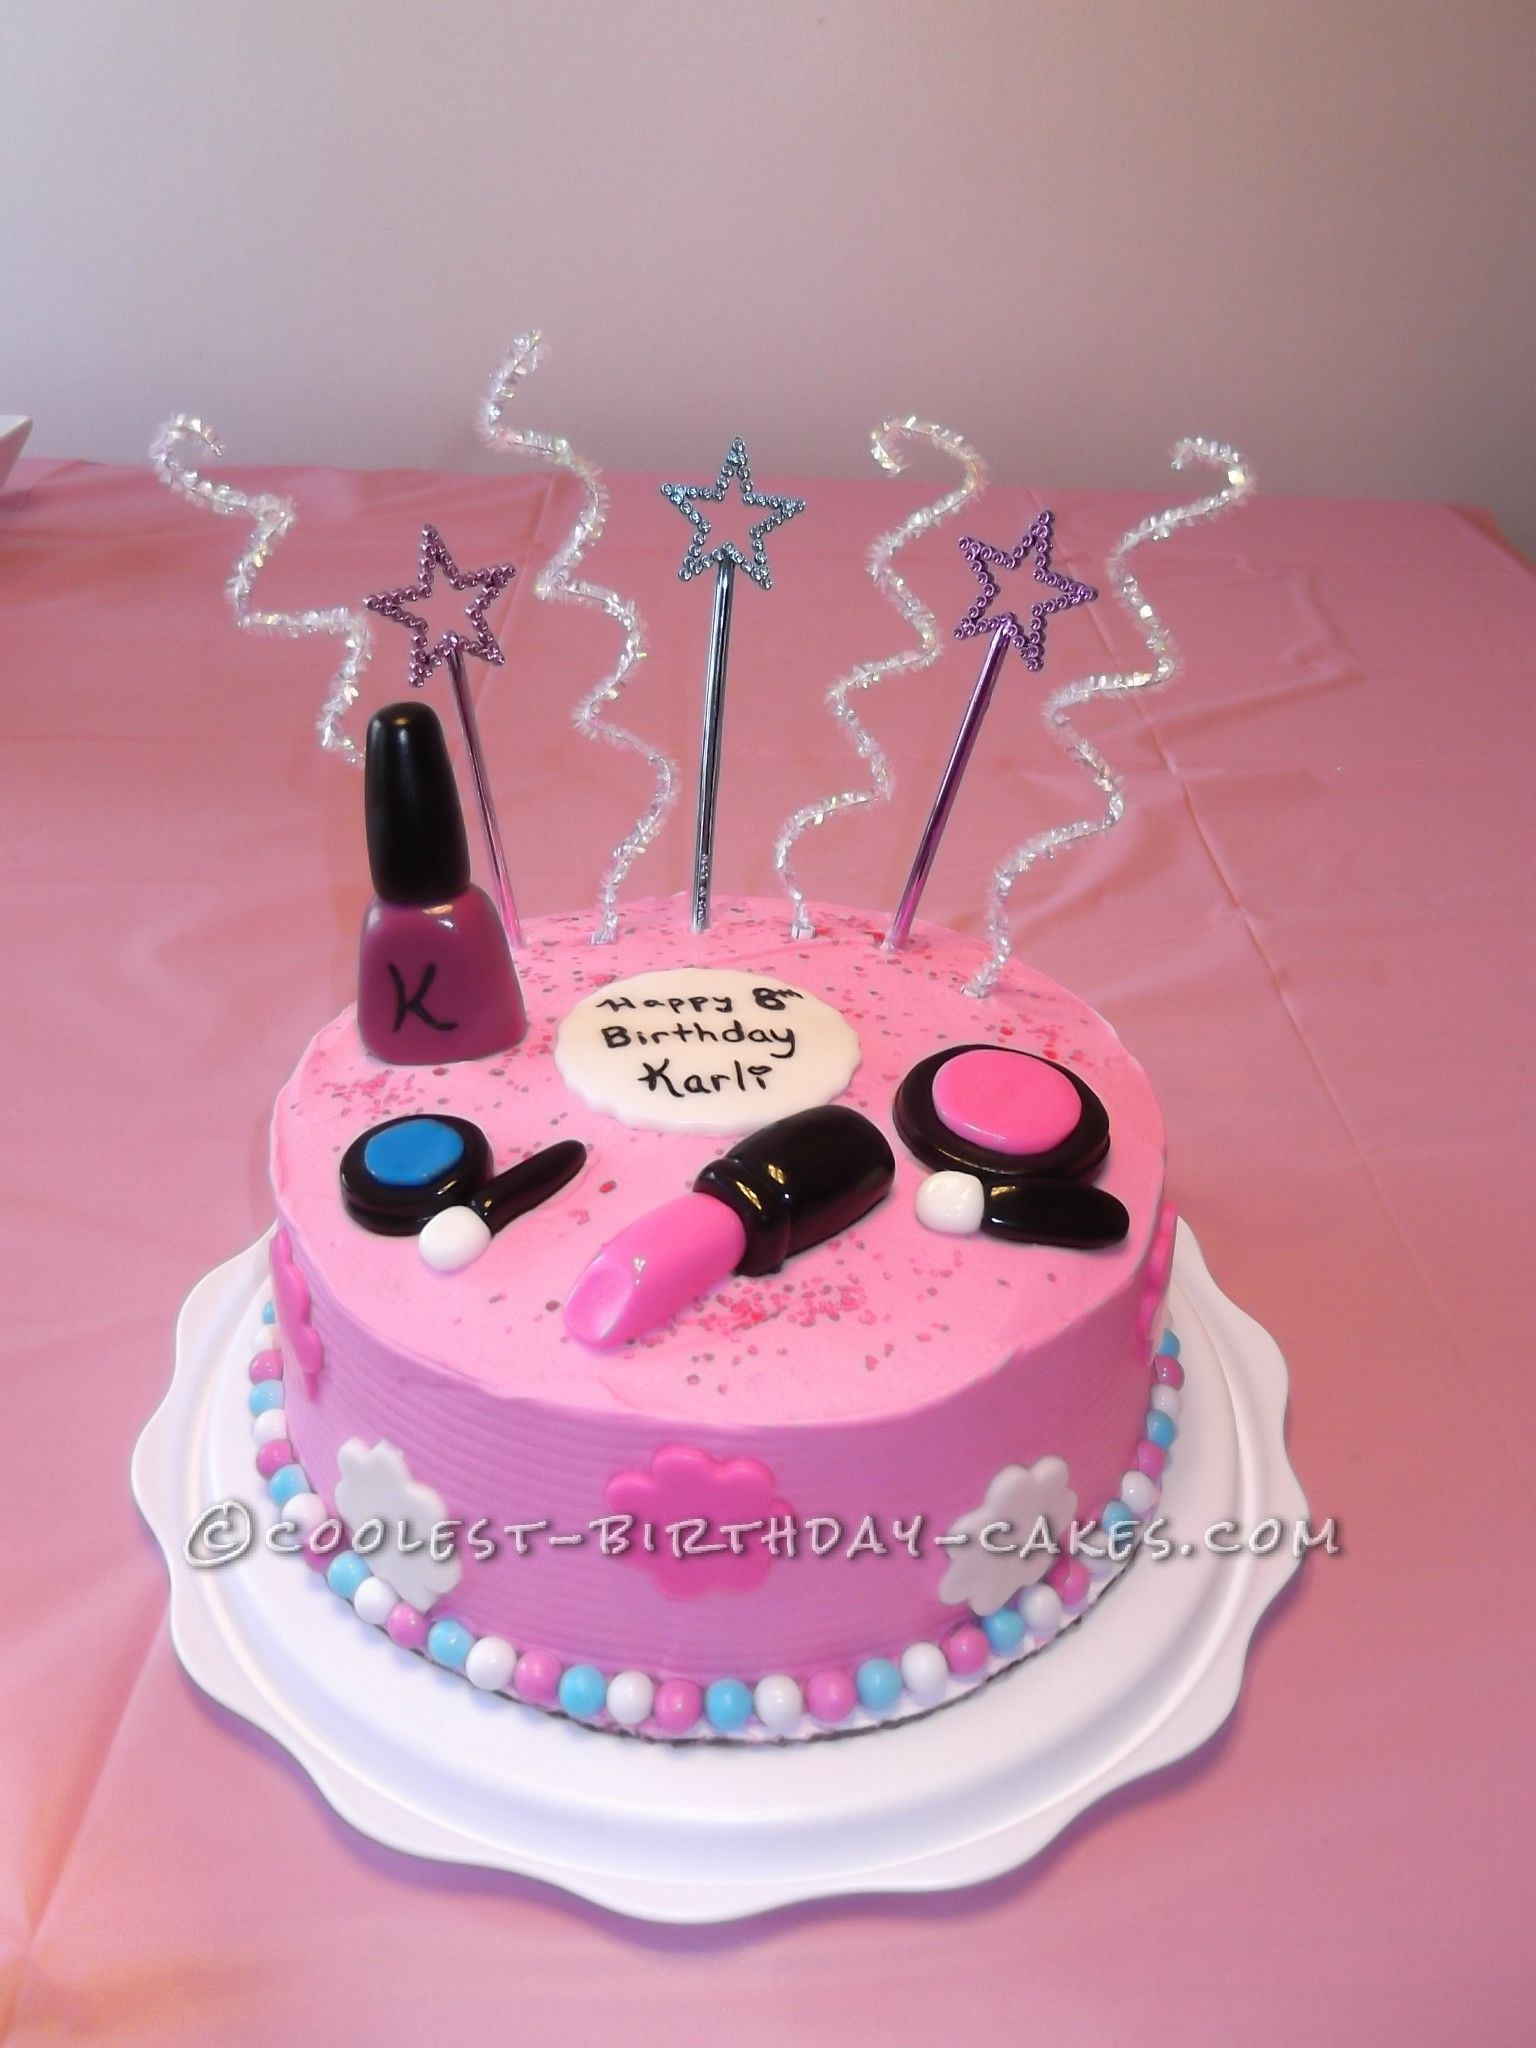 Birthday Party Ideas For 8 Year Old Girl
 Sweet Makeup Cake For An 8 Year Old Girl